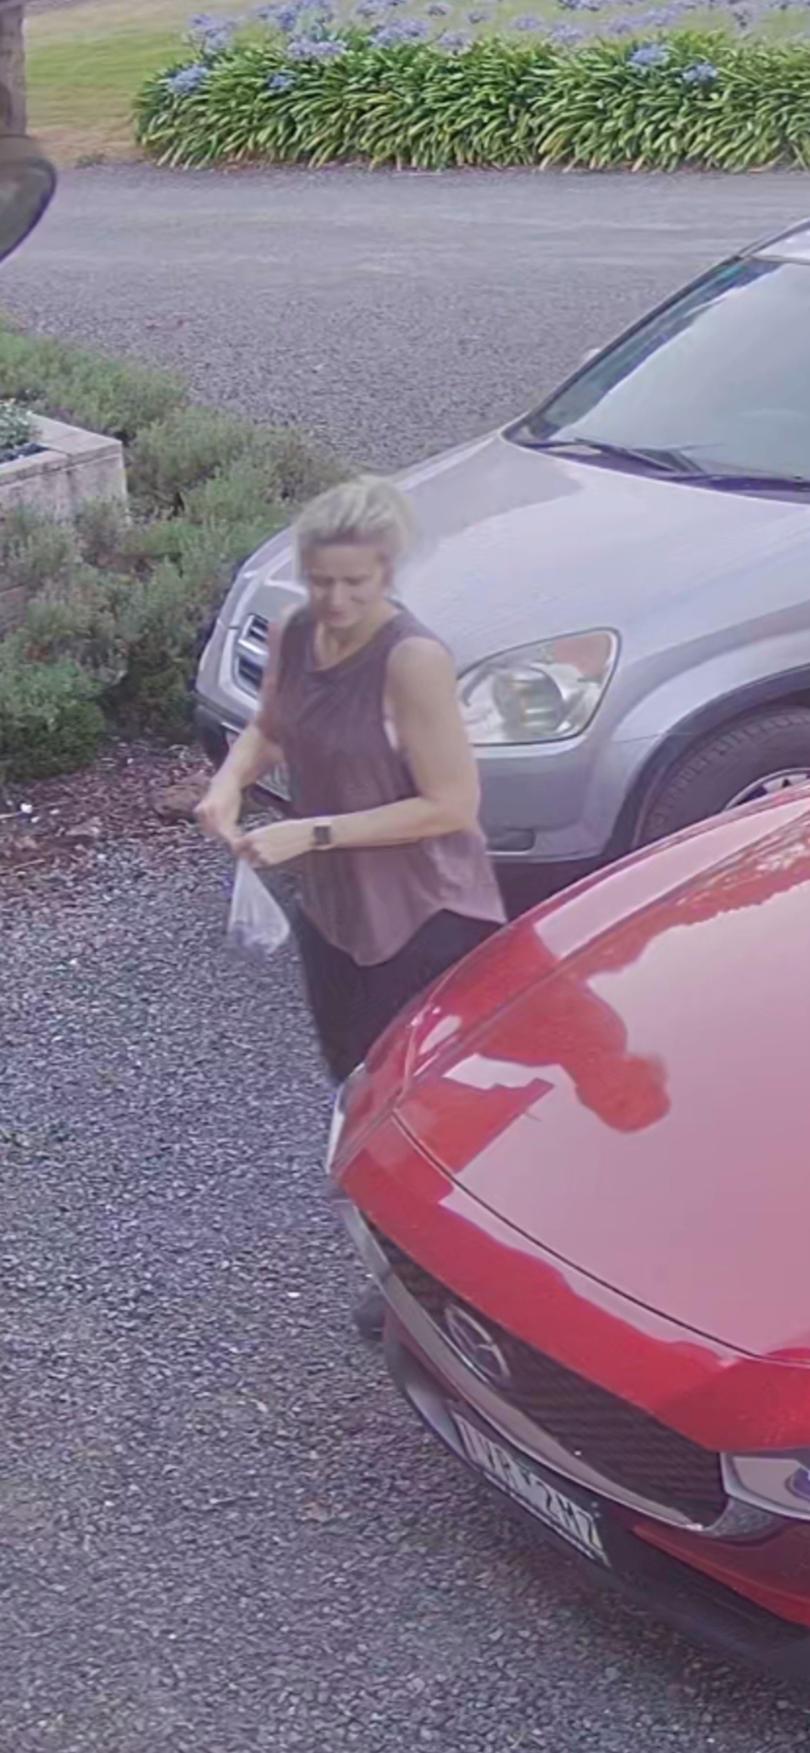 Police and emergency services are continuing their search for missing Ballarat East woman Samantha Murphy. The 51-year-old was last seen leaving her property on Eureka Street to go for a run, about 7am Sunday, 4 February.